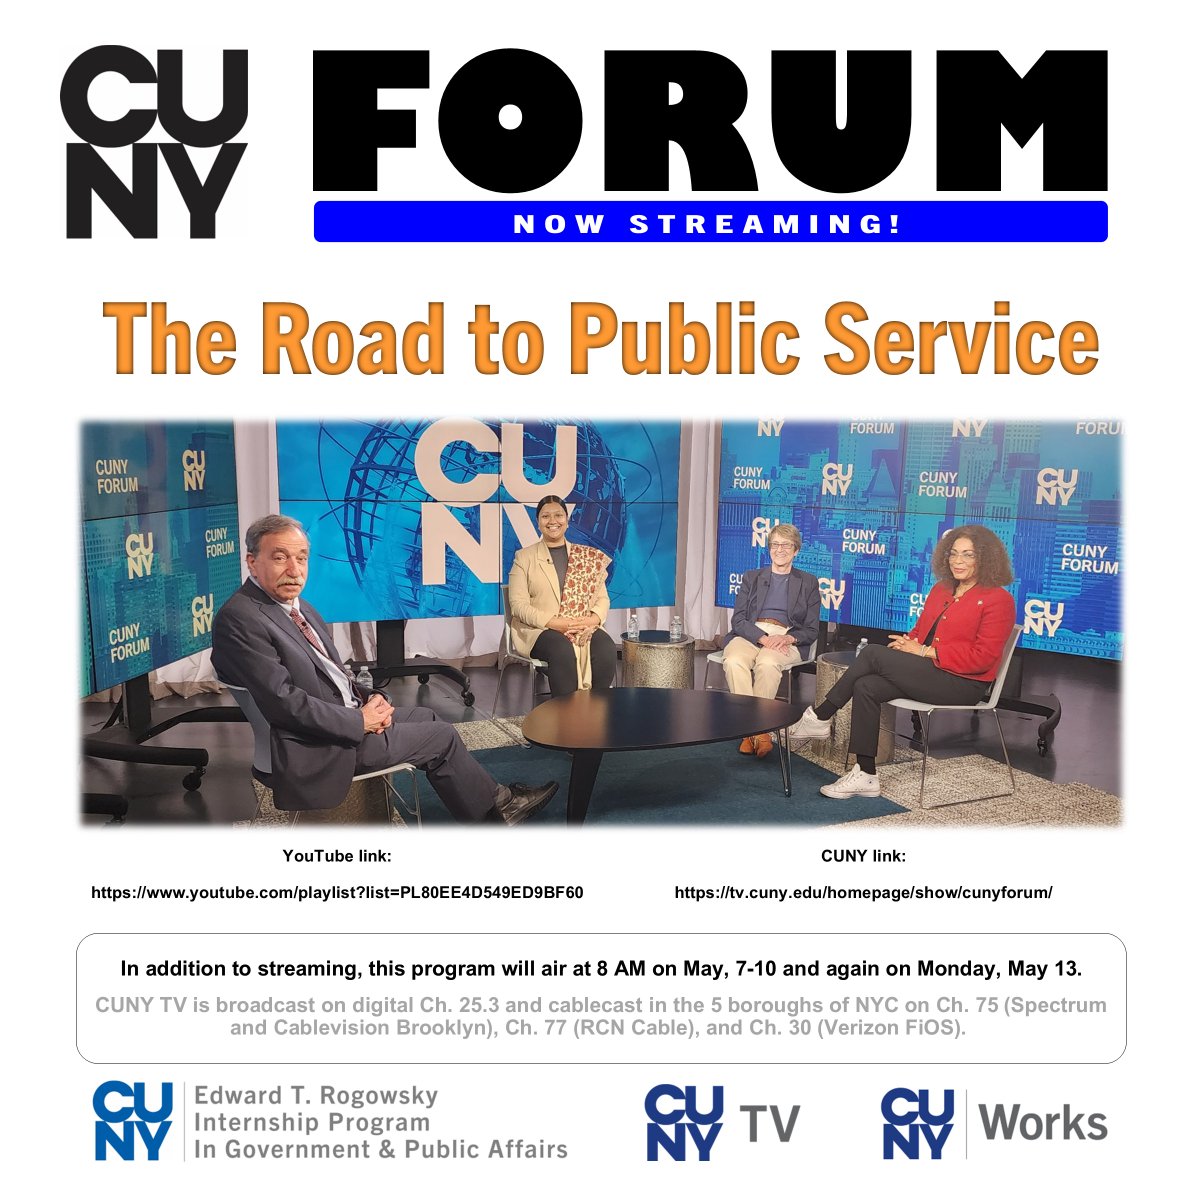 CUNY FORUM: NOW STREAMING 'The Road to Public Service' youtu.be/EAcX0tXiWso?si… We explore the paths that brought our panelists into public service and how their time as CUNY students shaped their perspectives on the upcoming election. #PublicServiceRecognitionWeek